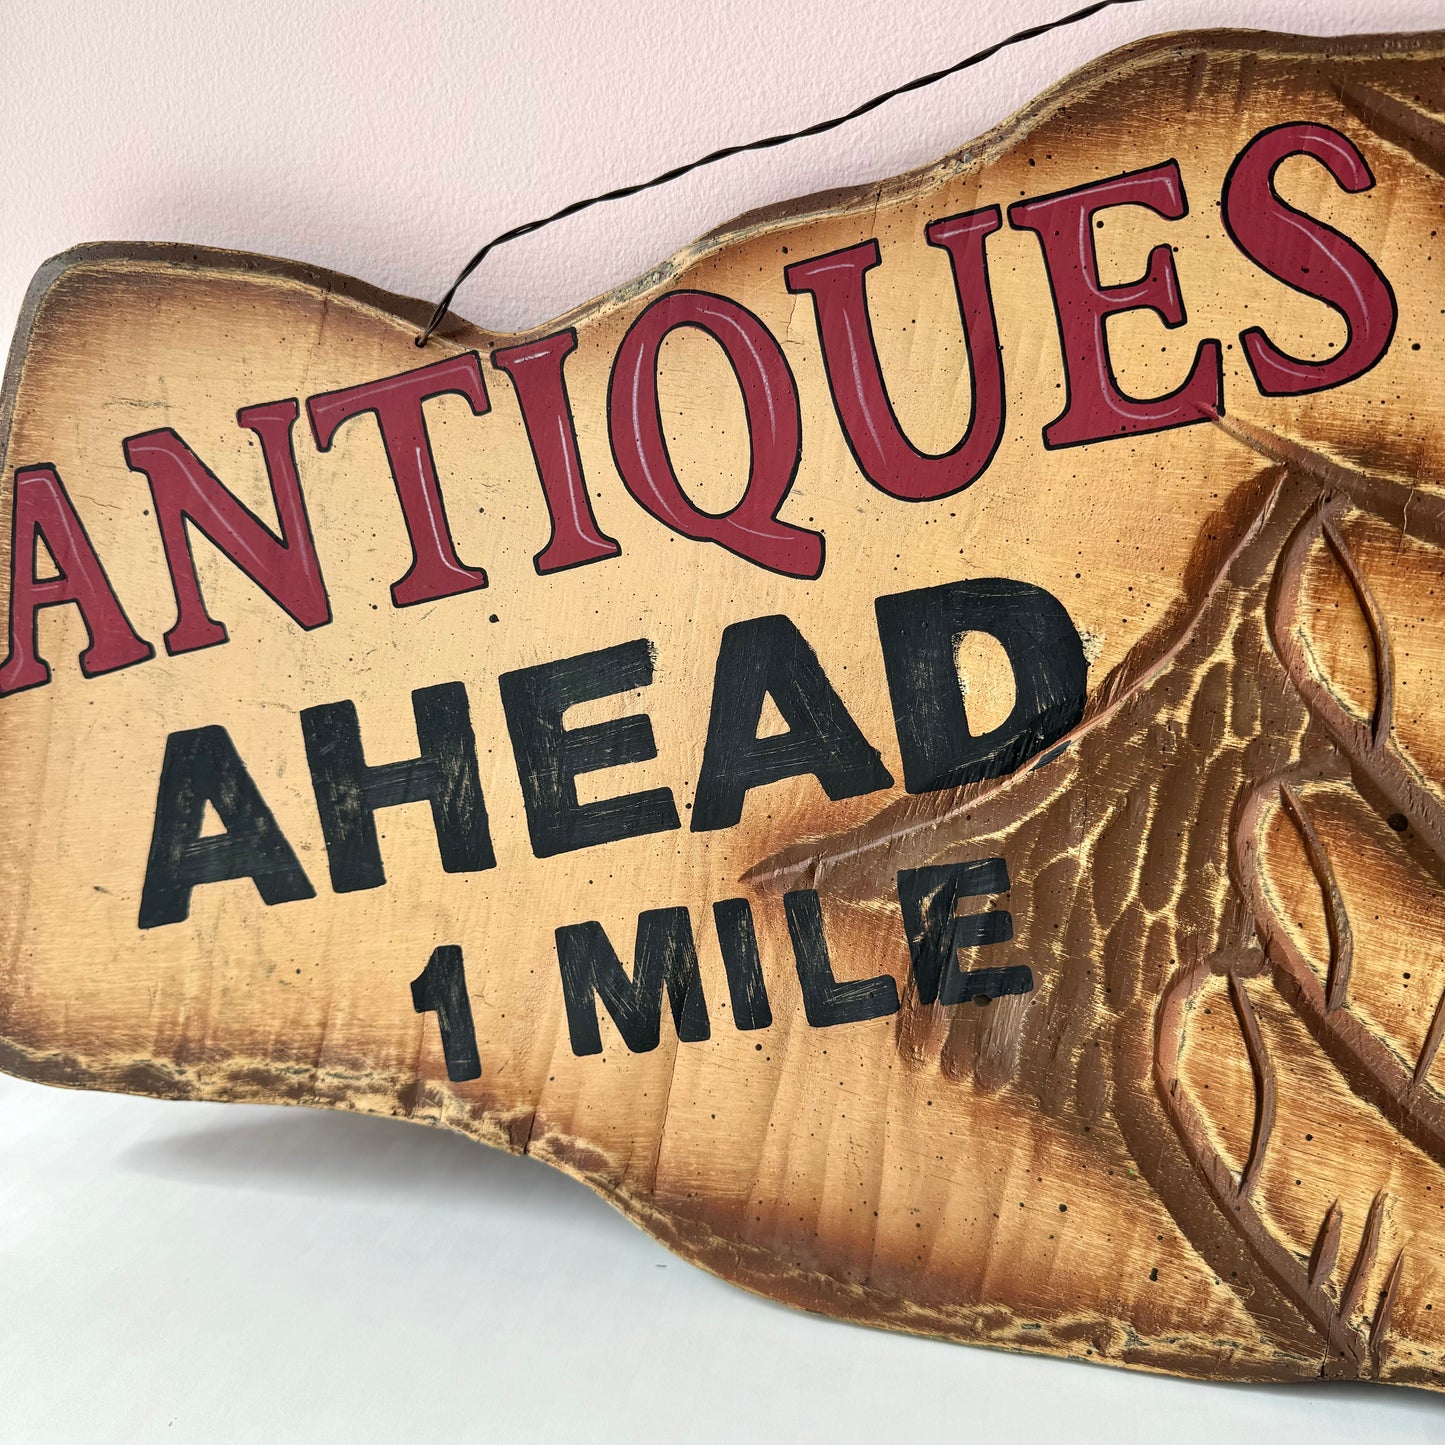 Vintage “Antiques Ahead 1 Mile” Pointing Hand Sign